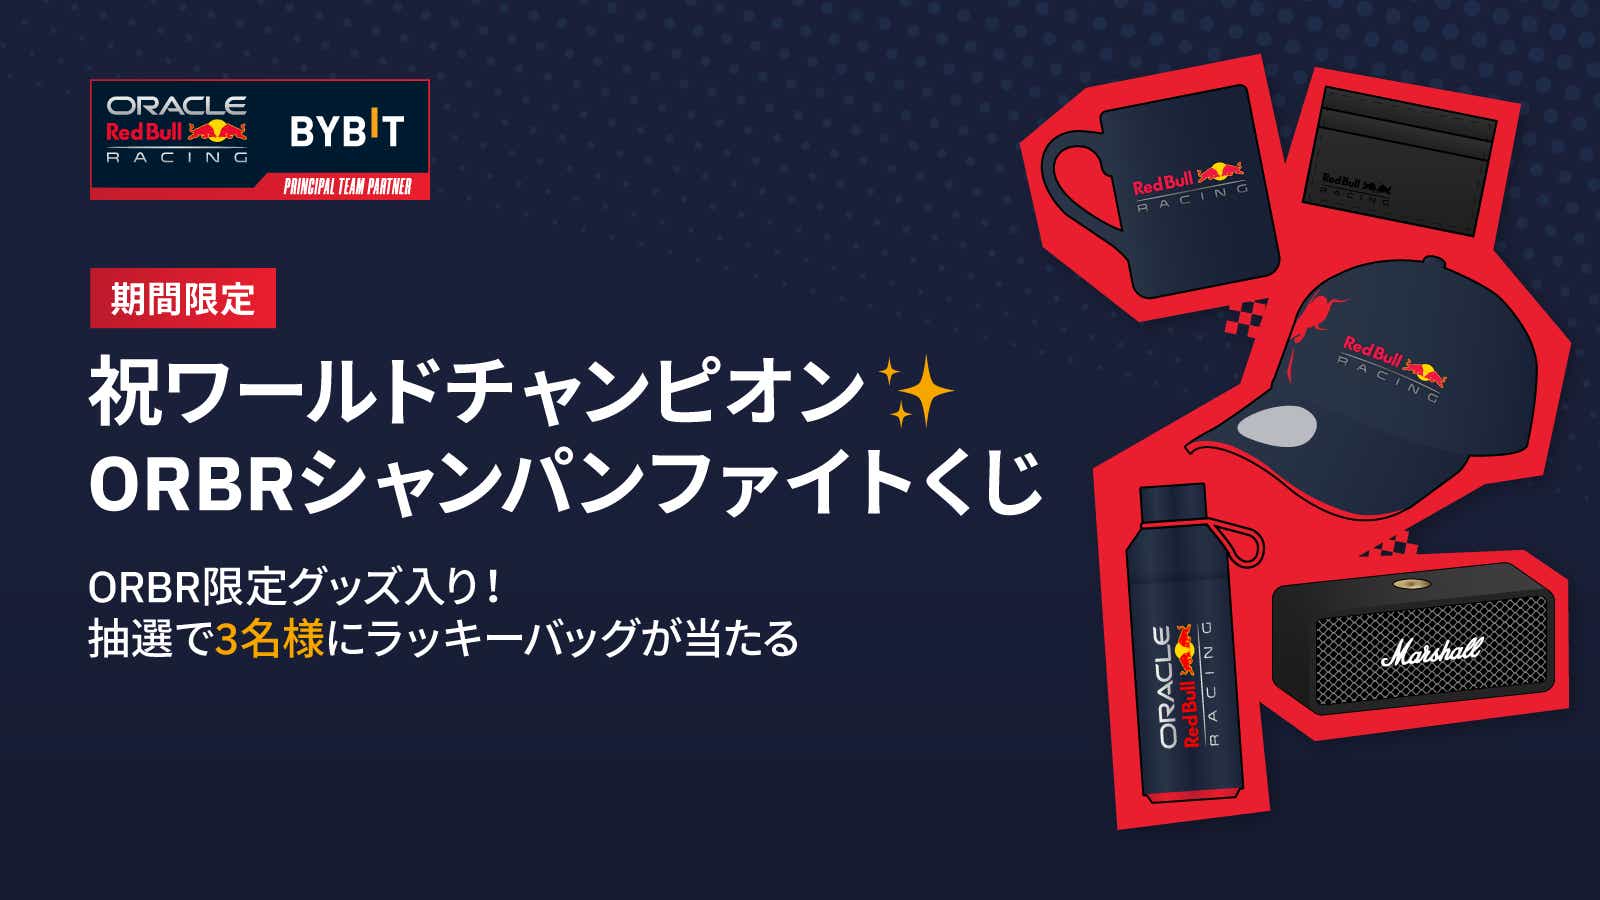 Bybit Announcement | 【ORACLE RED BULL RACINGシャンパンファイト